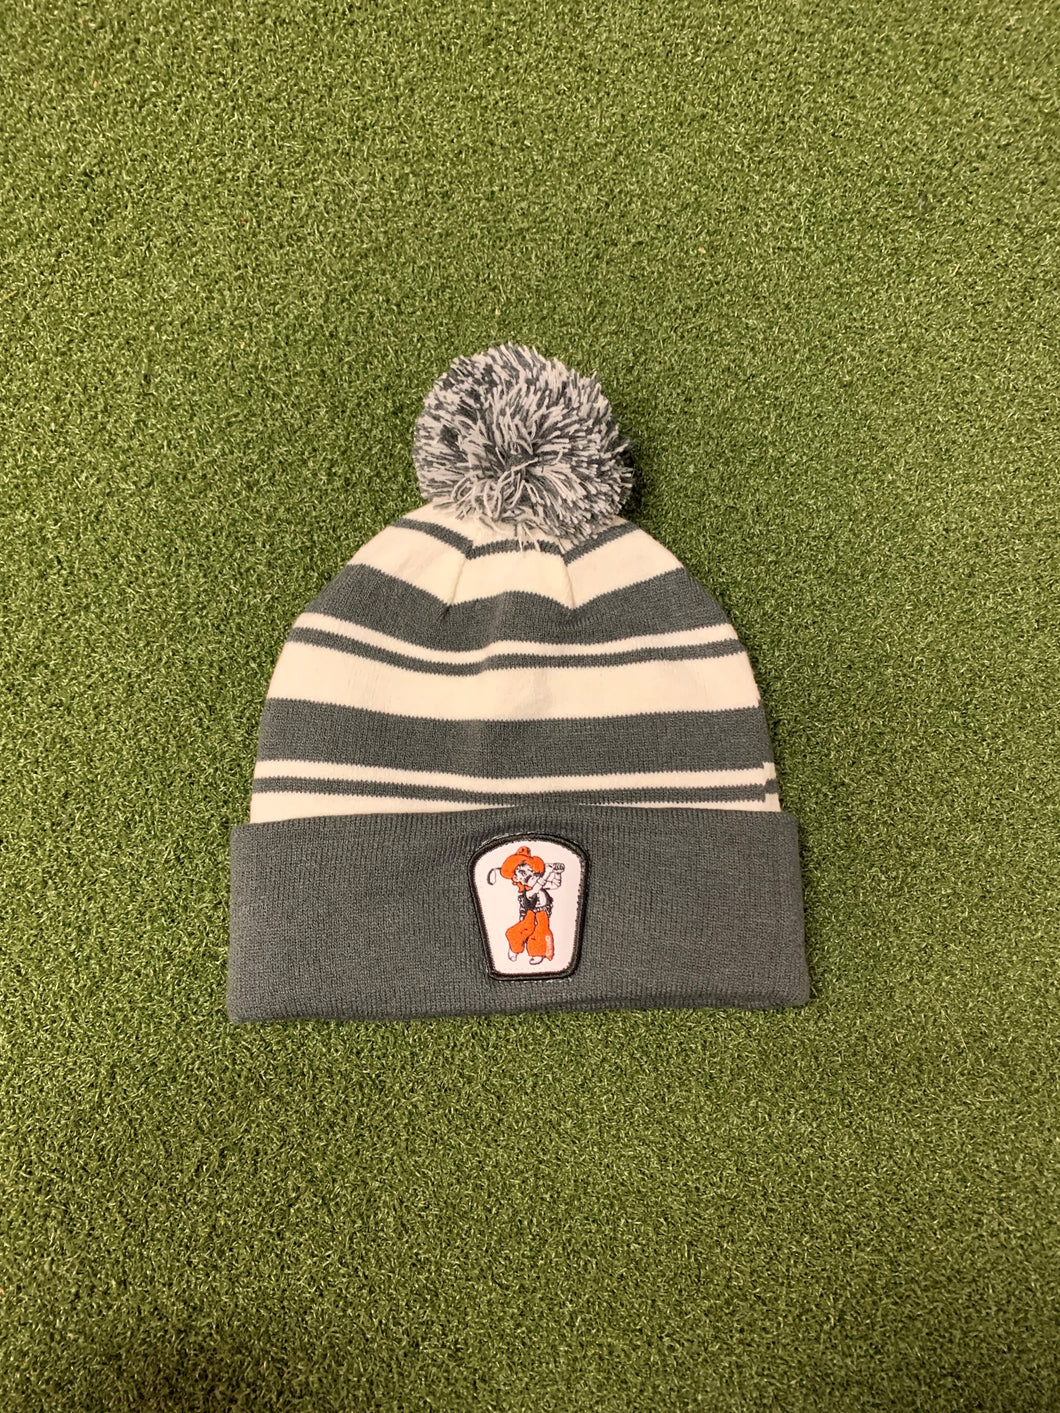 Imperial Cloudspin Beanie w/Patch- Grey Striped